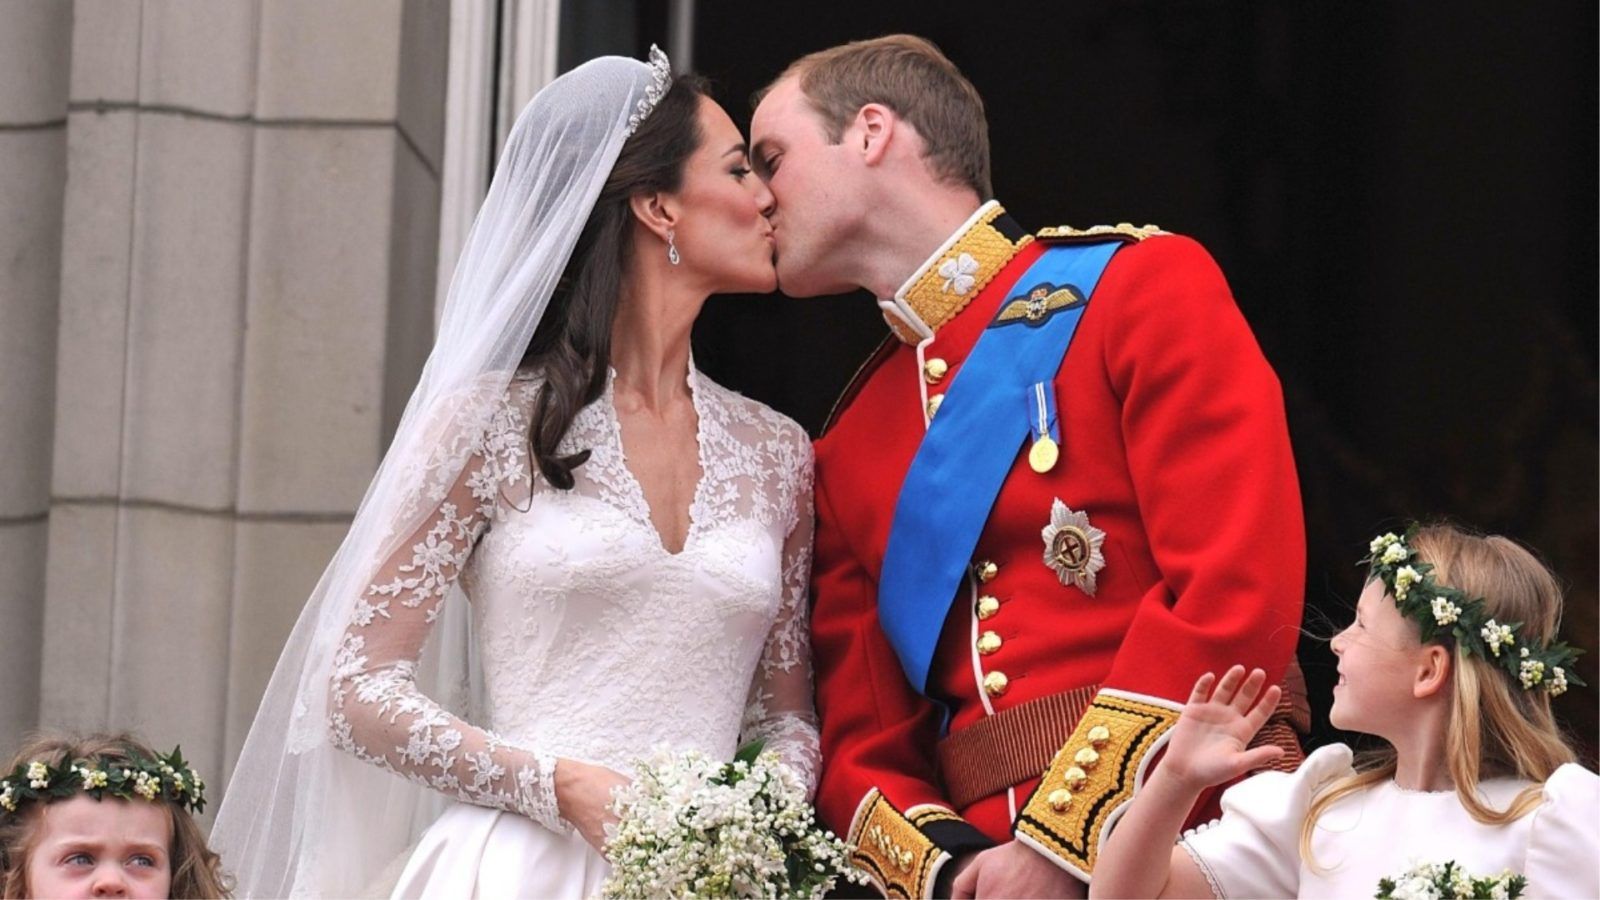 We finally know what Prince William said to Kate Middleton on the balcony at Buckingham Palace after their wedding ceremony